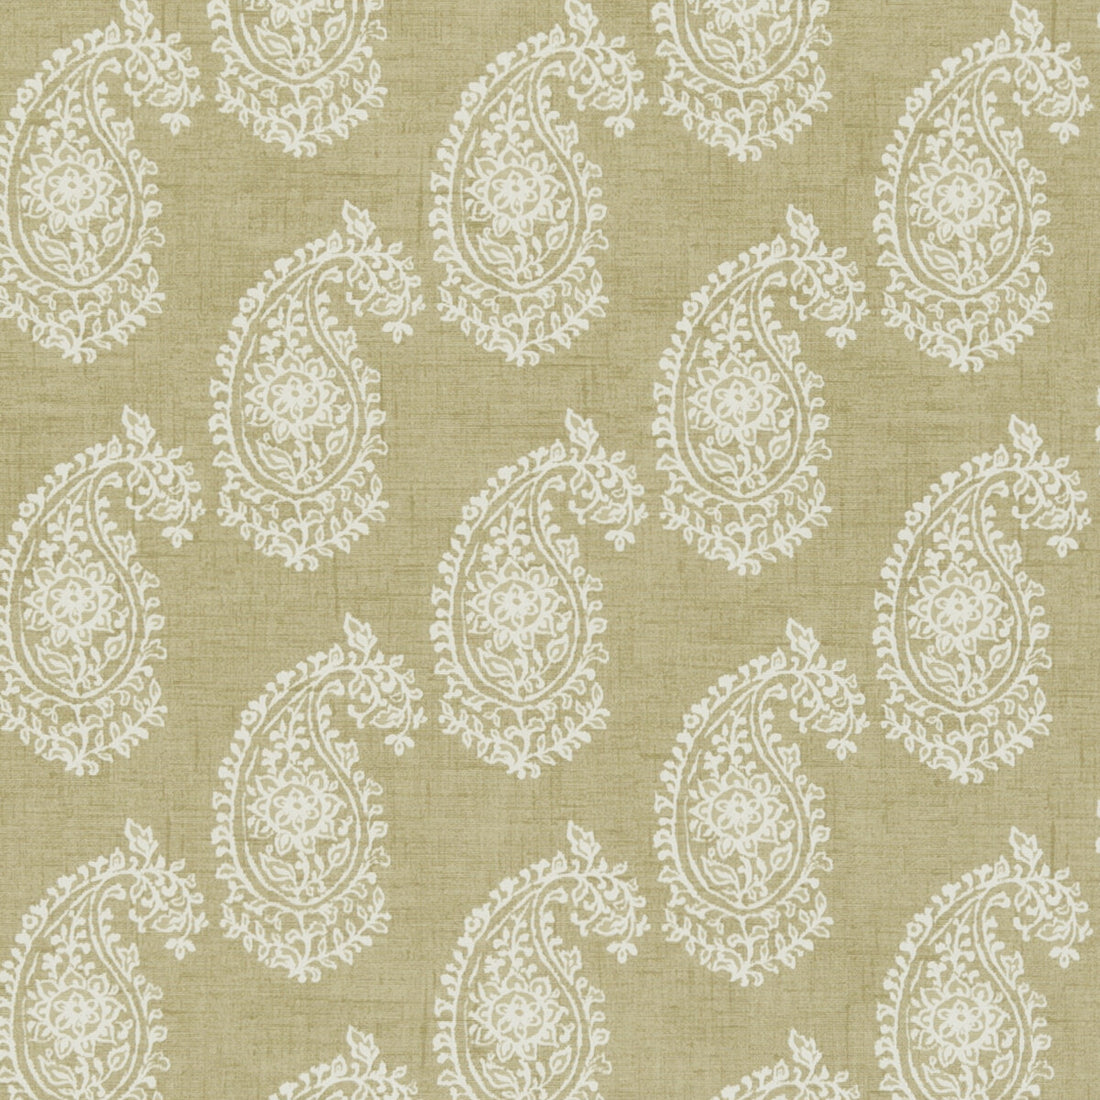 Harriet fabric in sage color - pattern F0623/05.CAC.0 - by Clarke And Clarke in the Genevieve By Studio G For C&amp;C collection